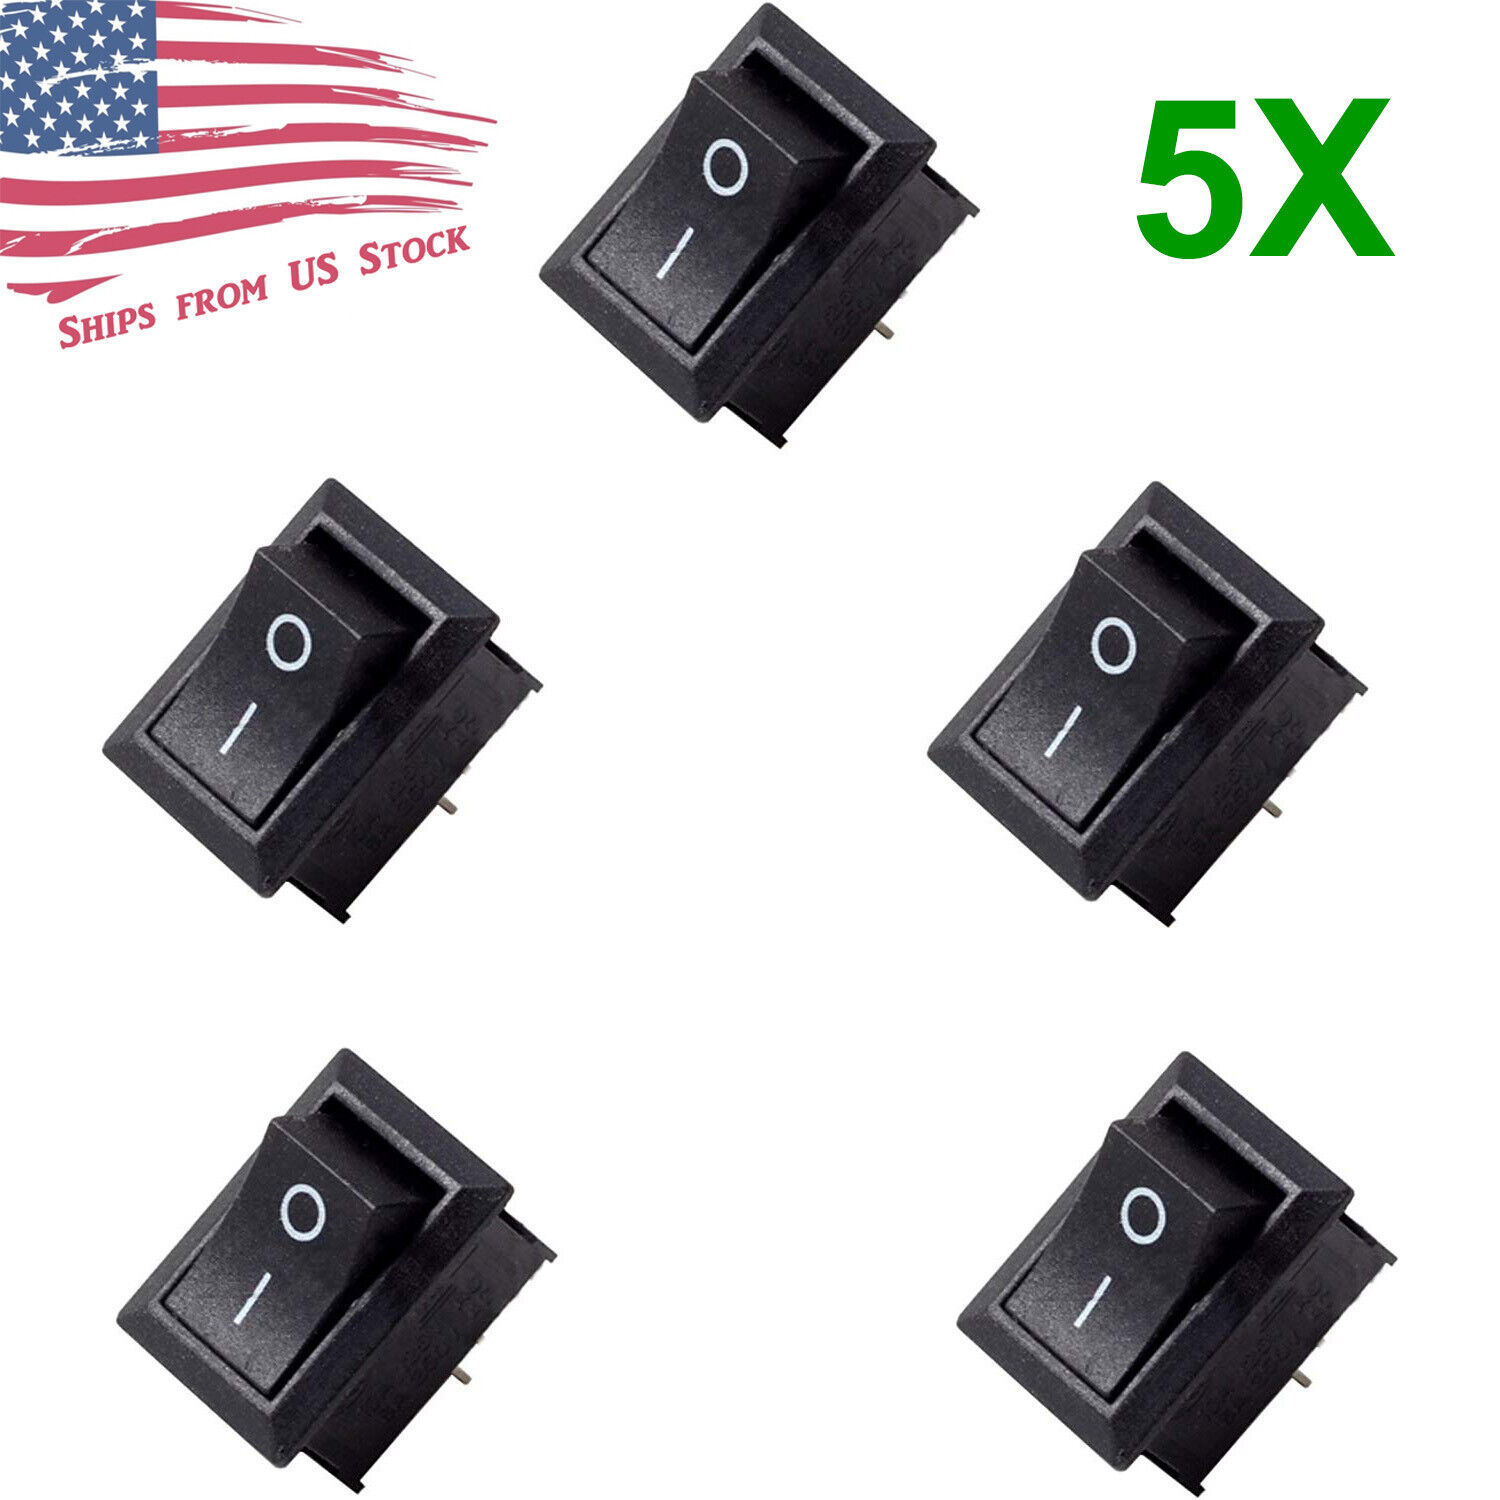 Primary image for 5Pcs Rocker Switch 2 Pin On-Off Spst 125Vac/10A 250Vac/6A 21X15Mm Black Kcd1-101